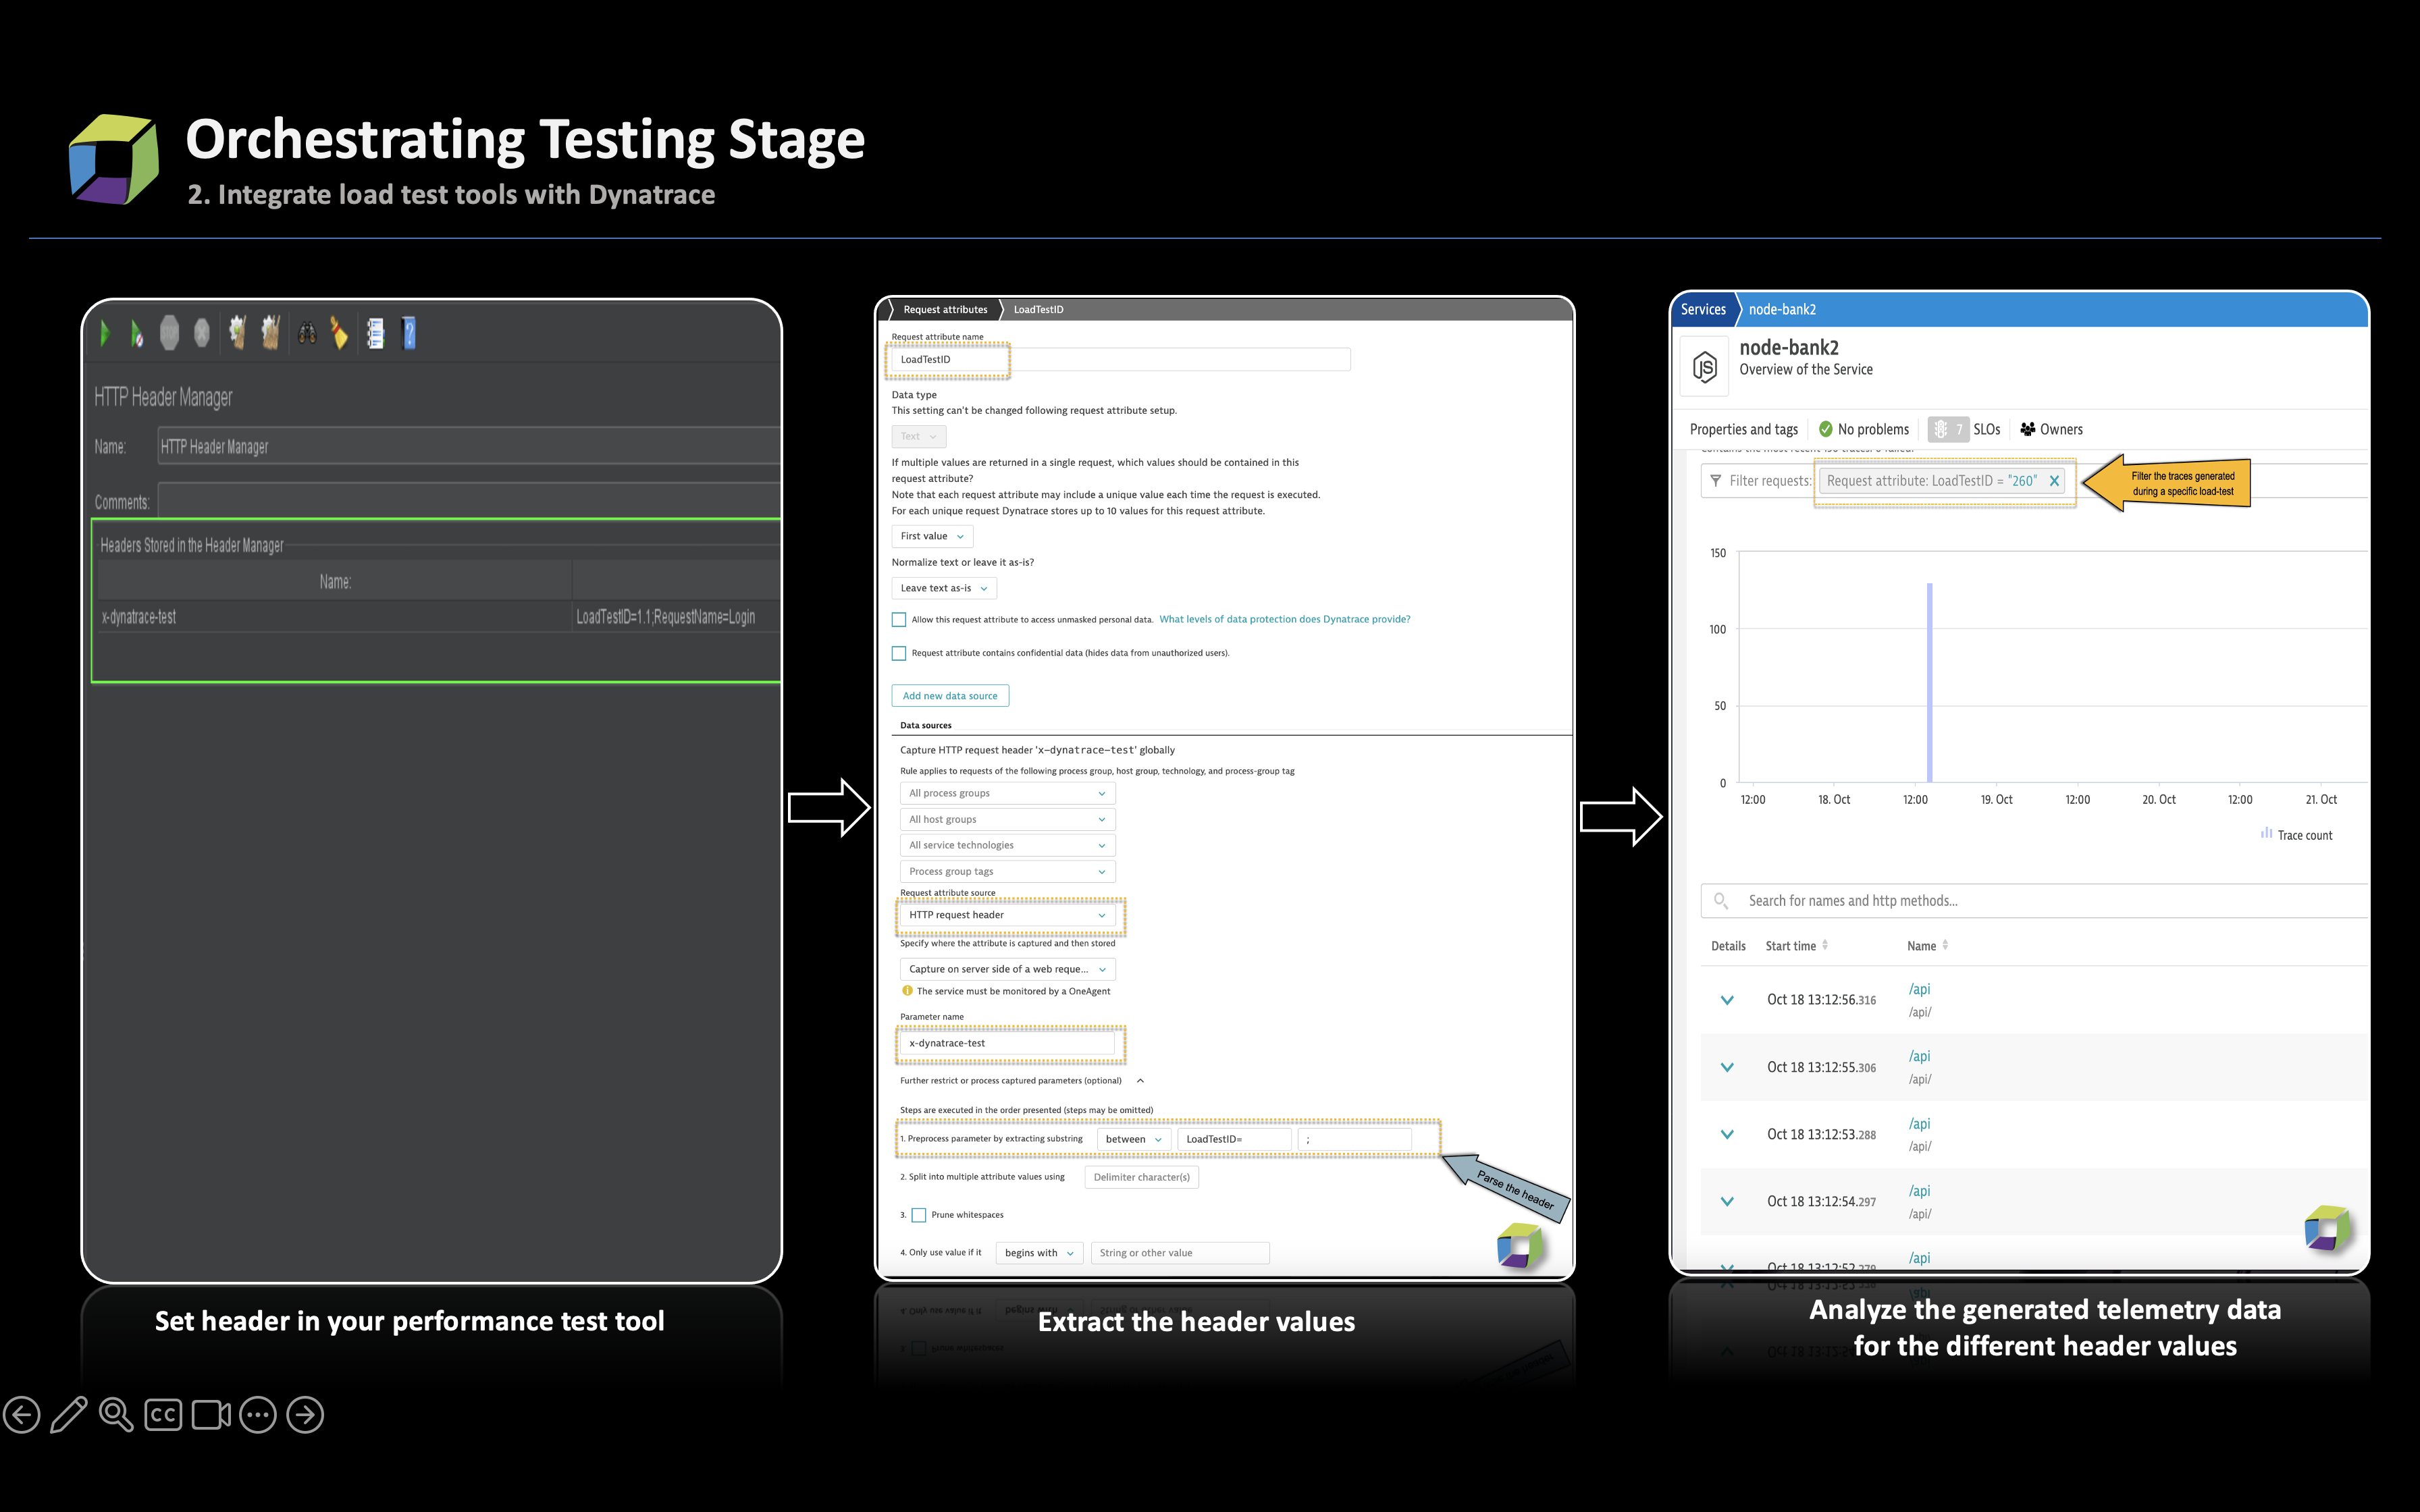 Integrate load test tools with Dynatrace